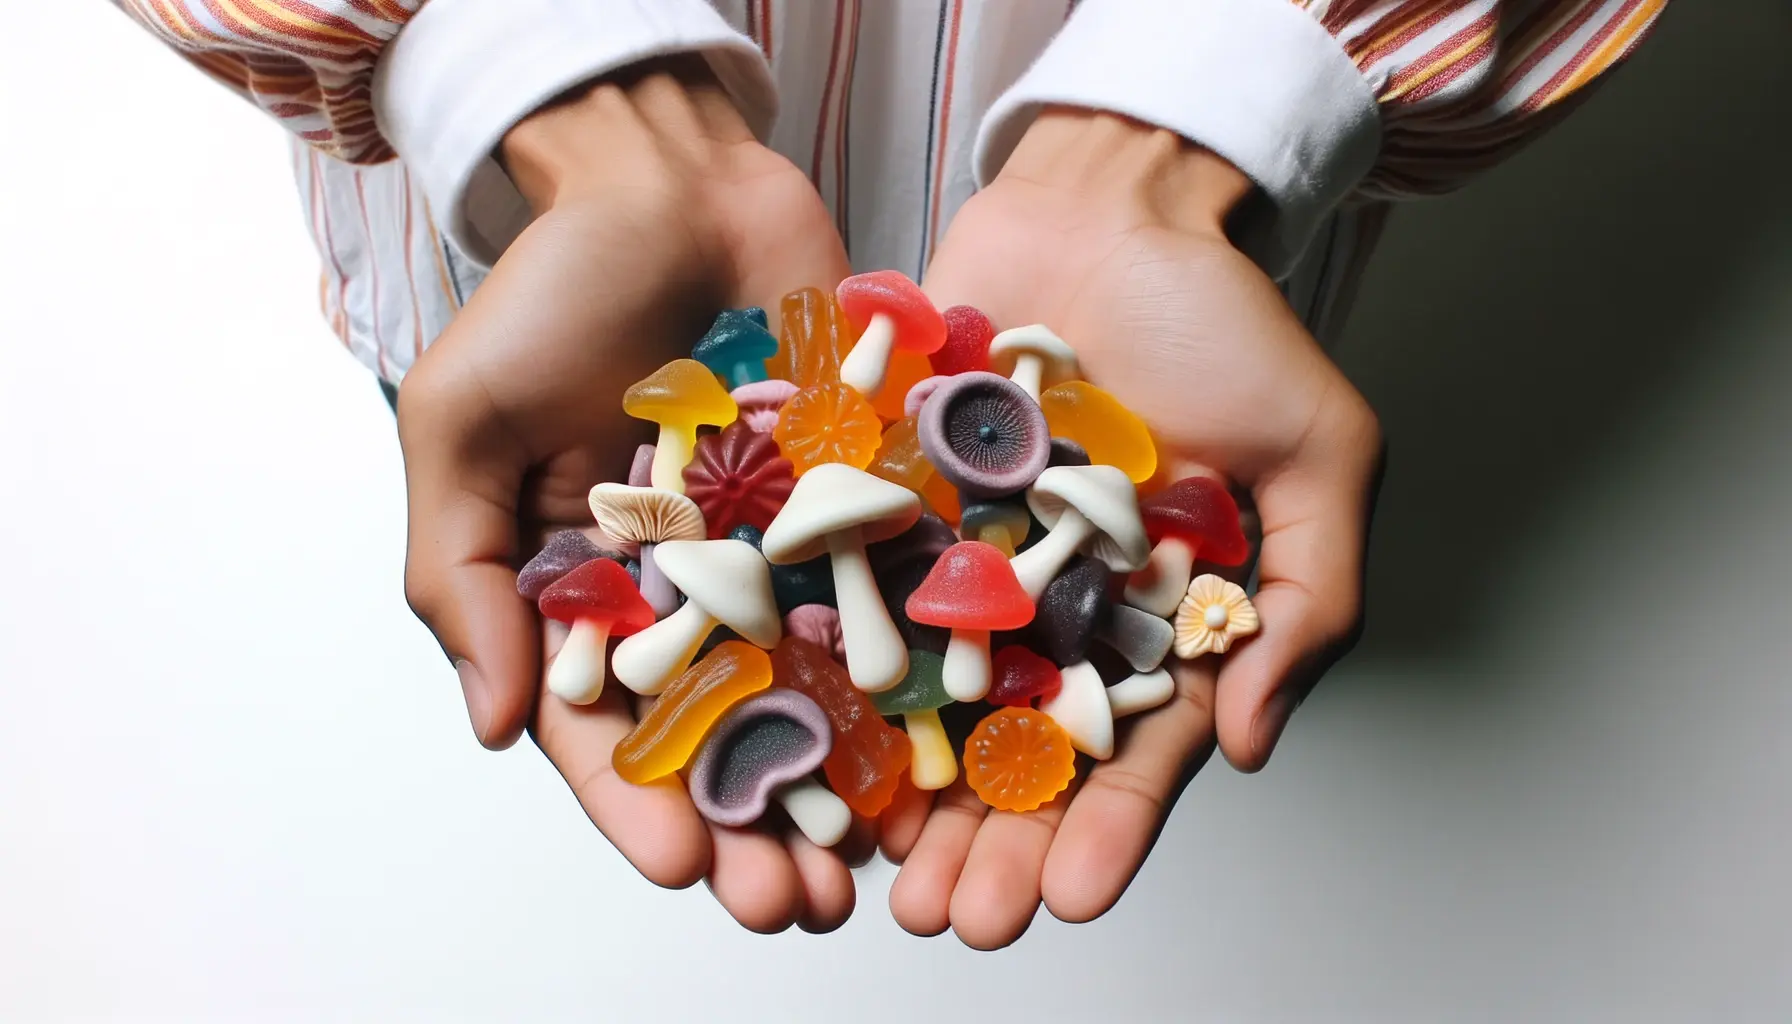 Handful of mushroom gummies held by a person with diverse descent. The gummies vary in size, with some being larger and some smaller. They are vibrant in color, and the background is a simple white to emphasize the gummies.